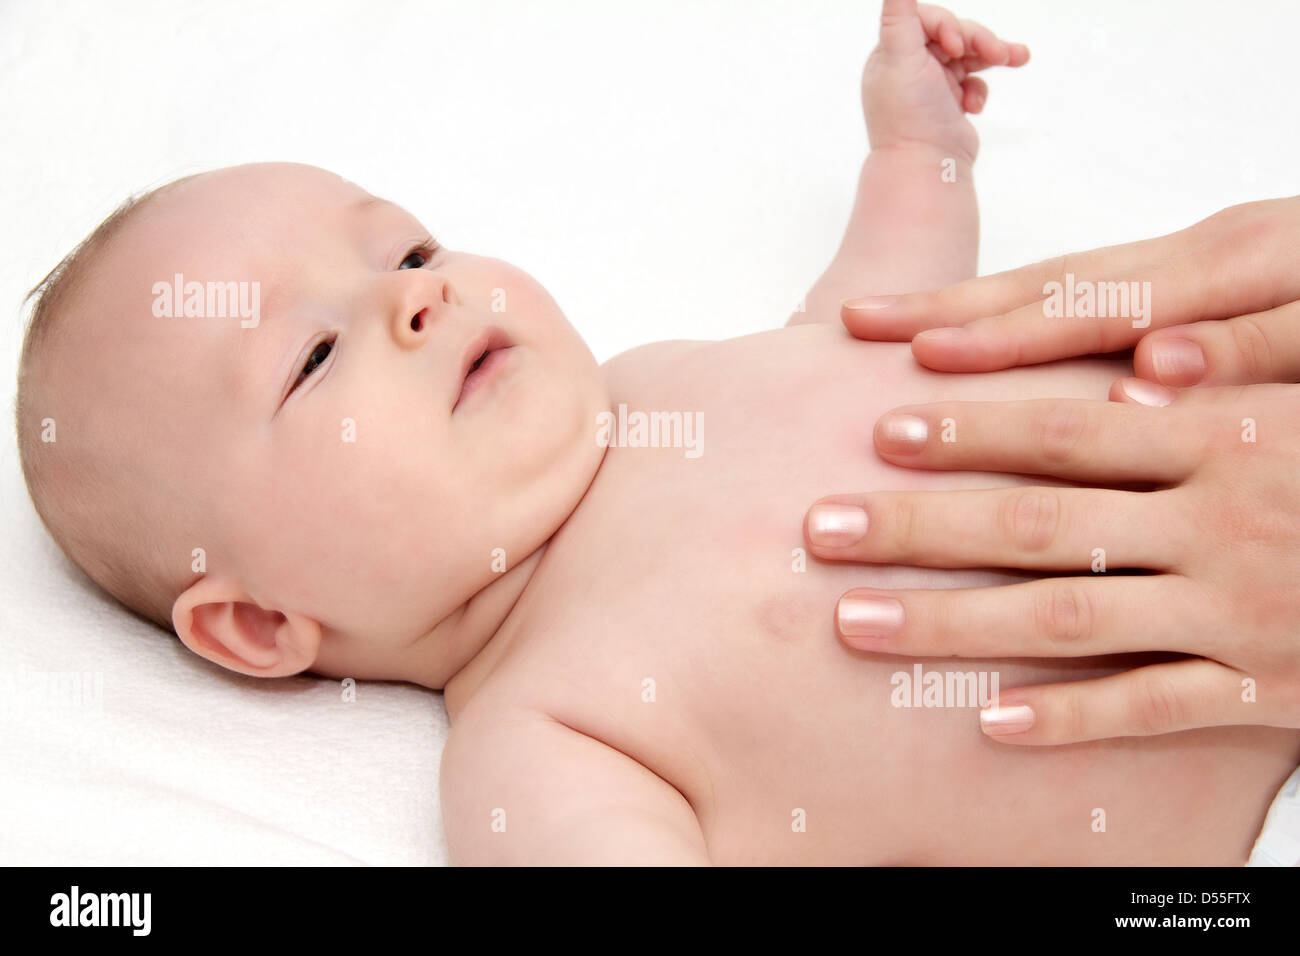 baby care after bath Stock Photo